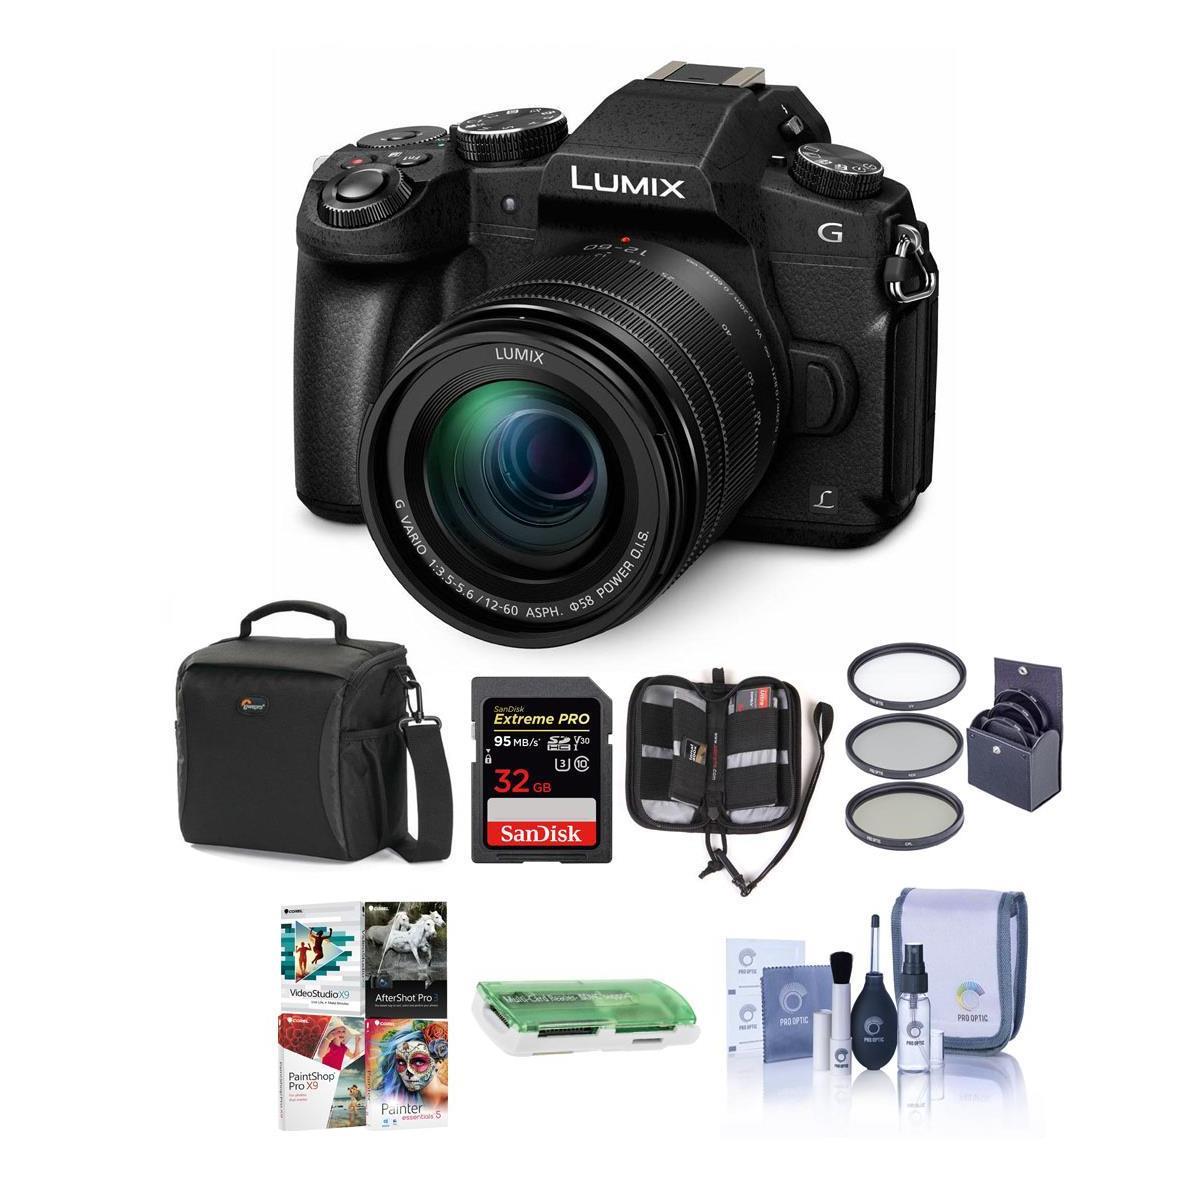 Image of Panasonic Lumix DMC-G85 Mirrorless with 12-60mm OIS Lens and Free Accessories